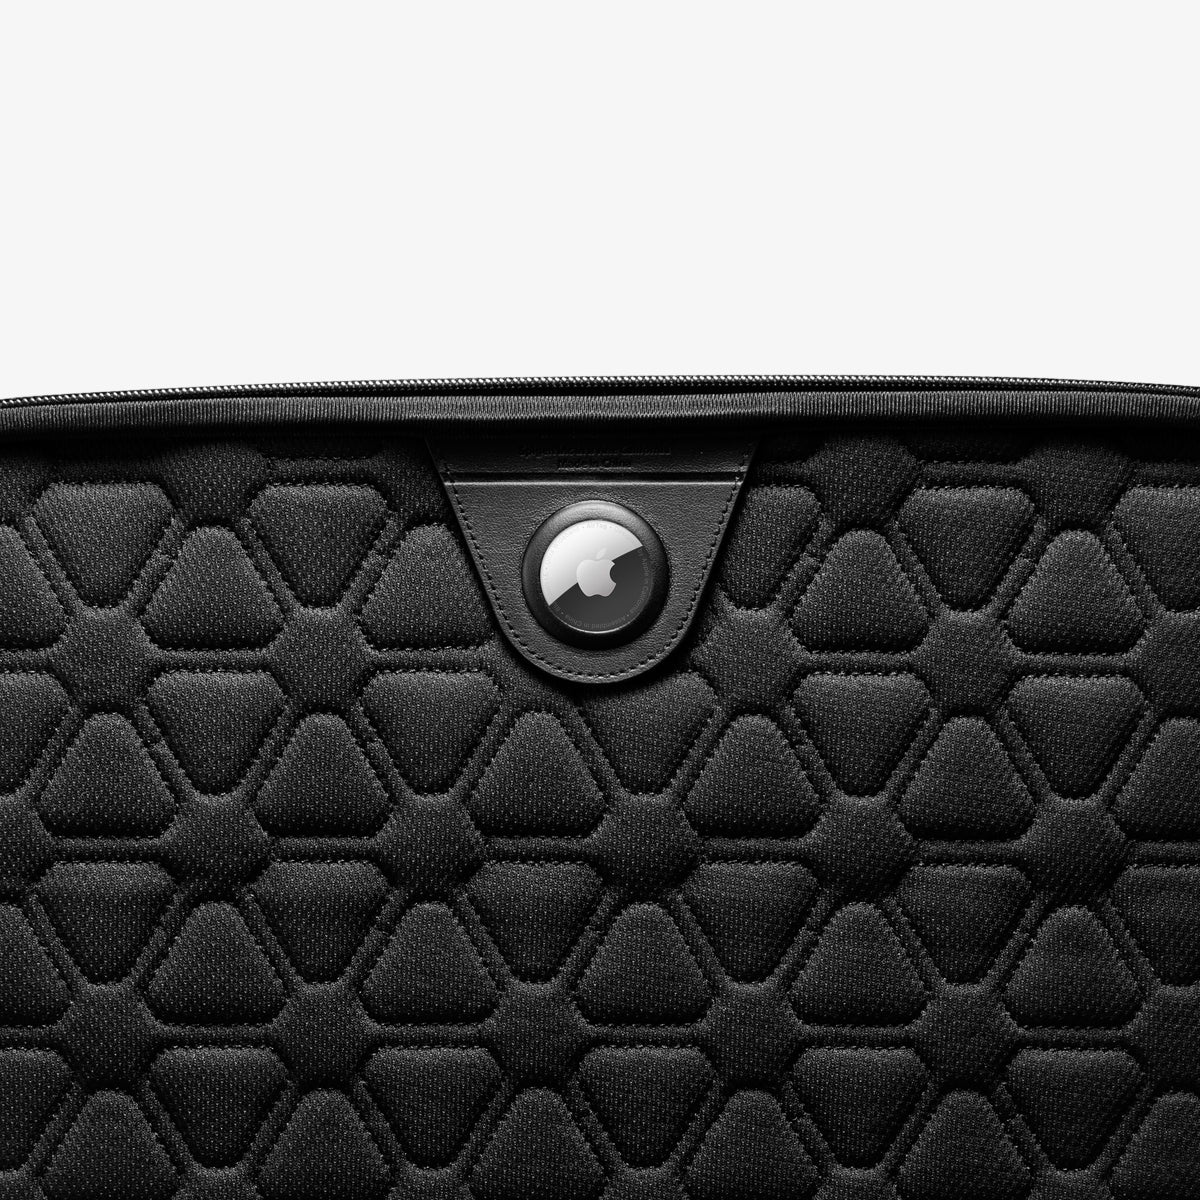 AFA04271 - MacBook Pro Series Rugged Armor Pro Pouch in black showing the inside of pouch with airtag slot